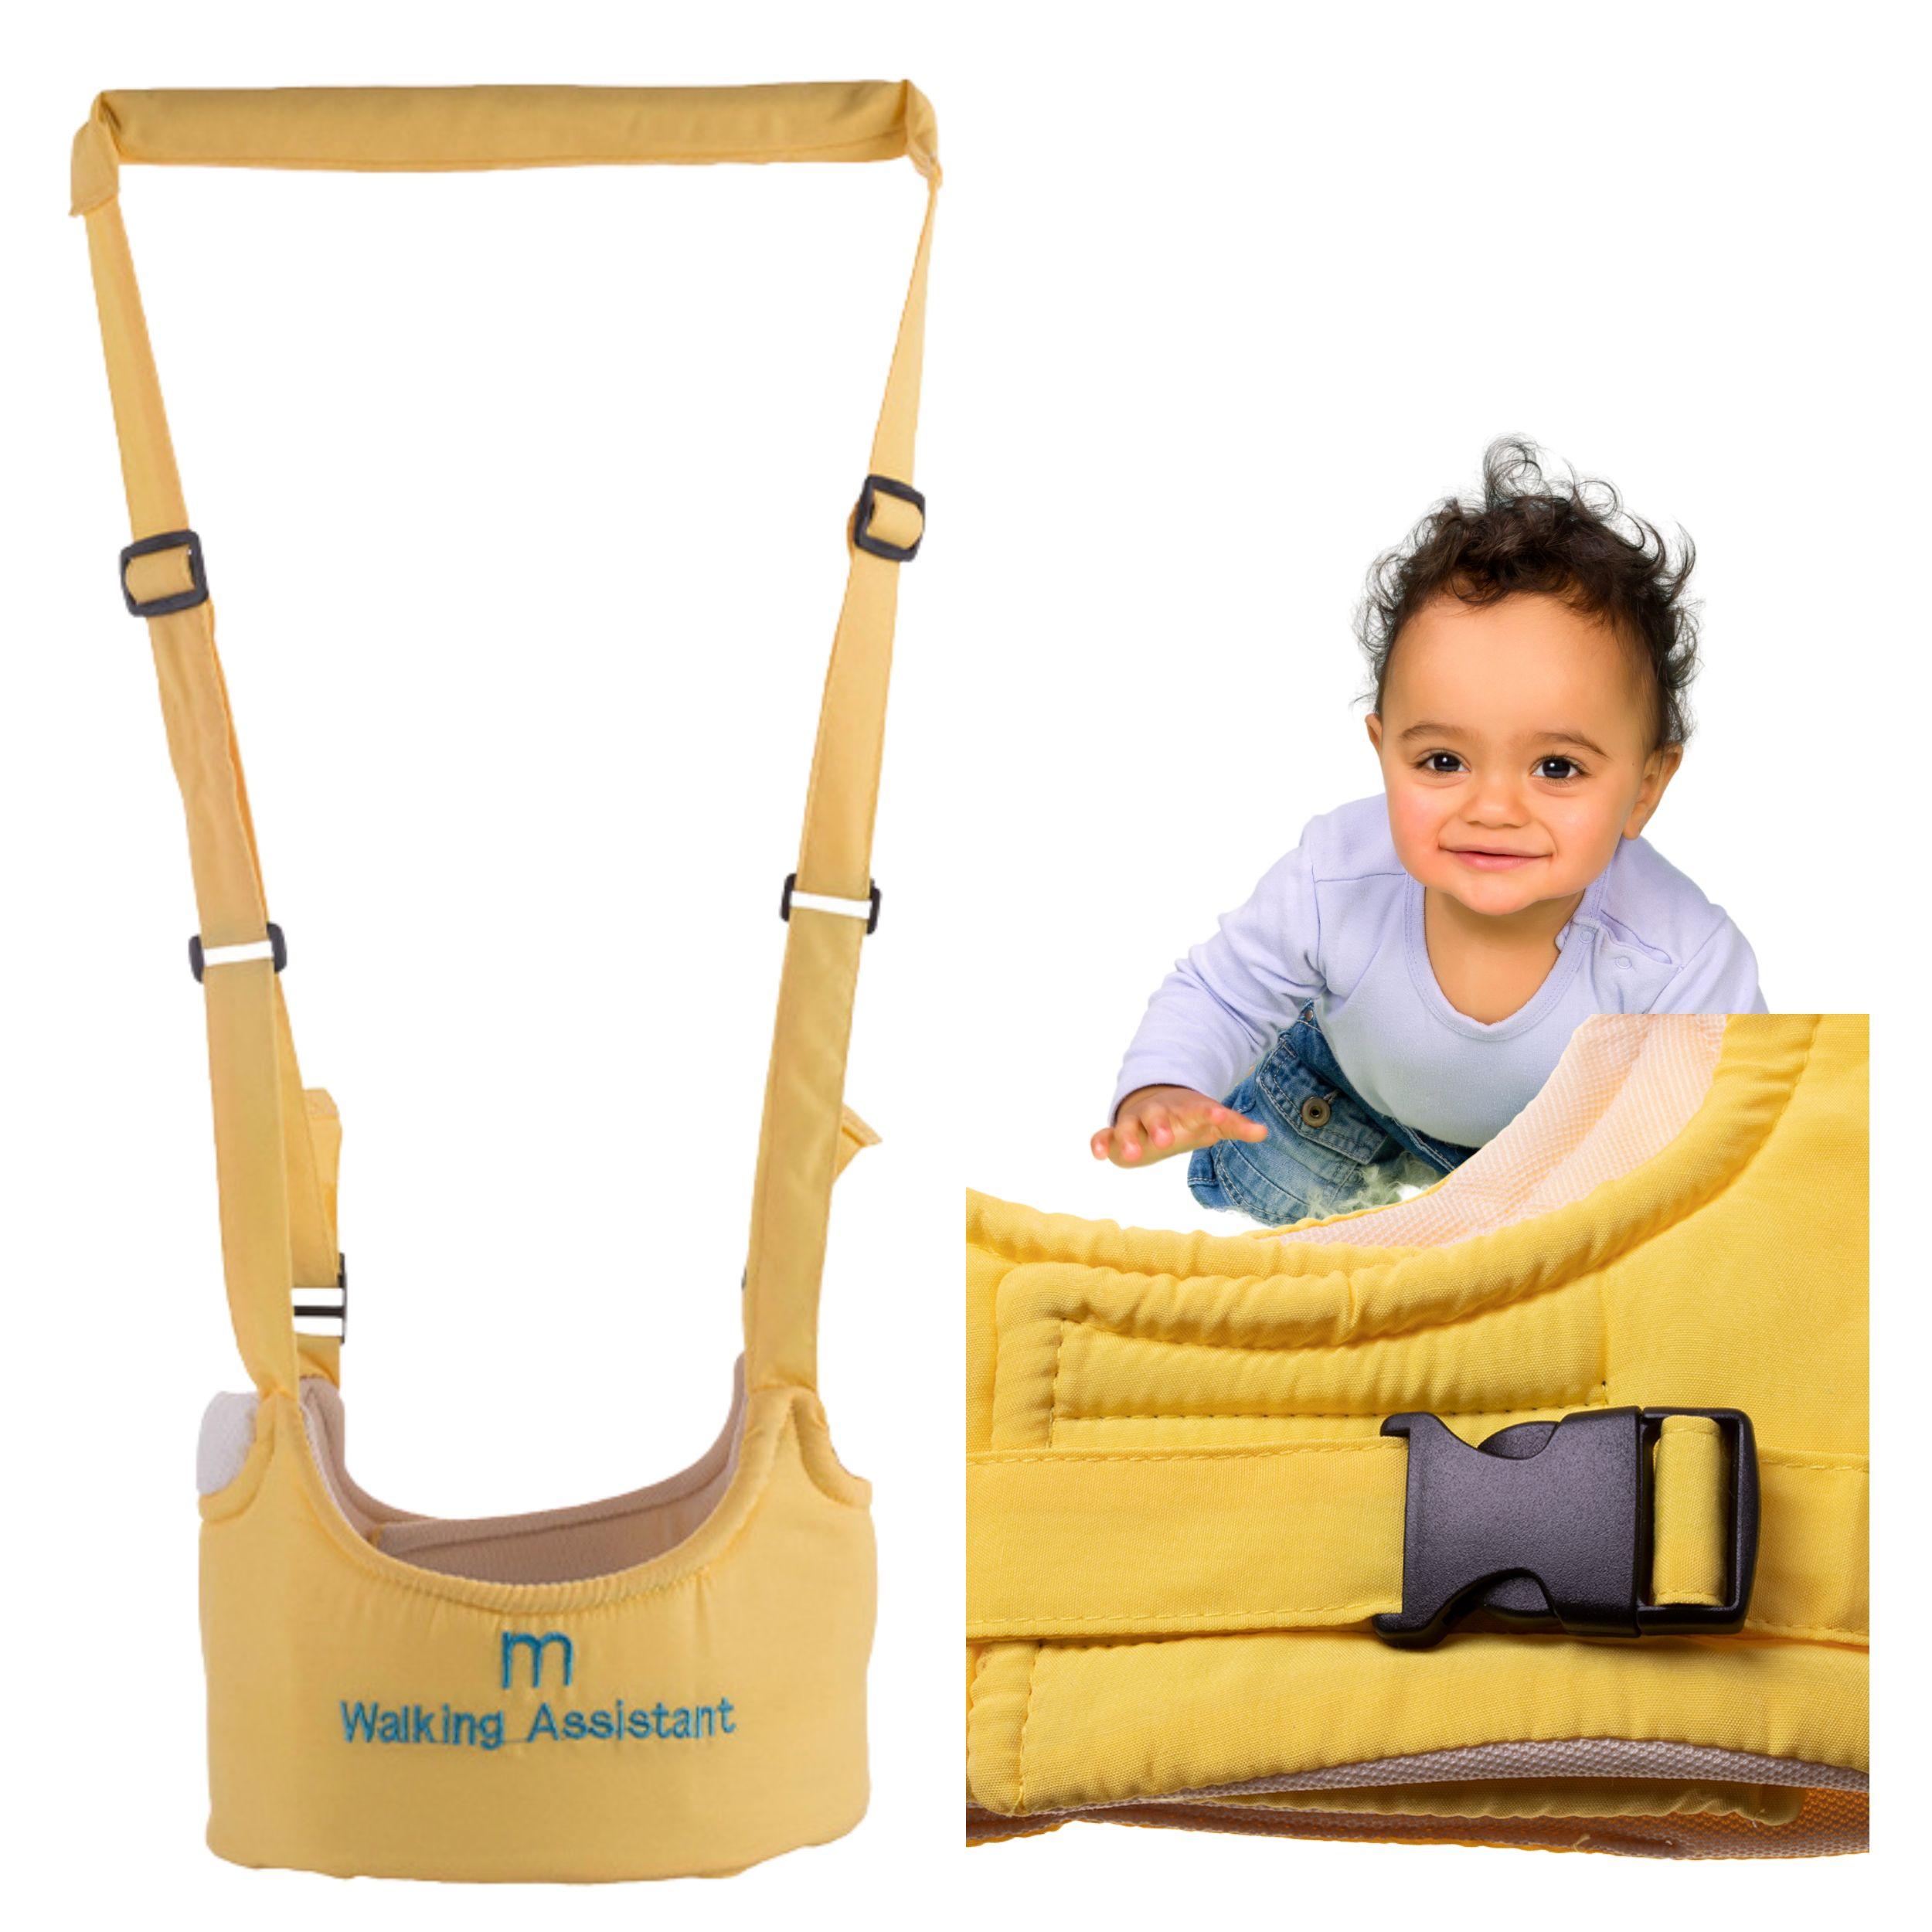 Braces for children to learn to walk, walker - yellow